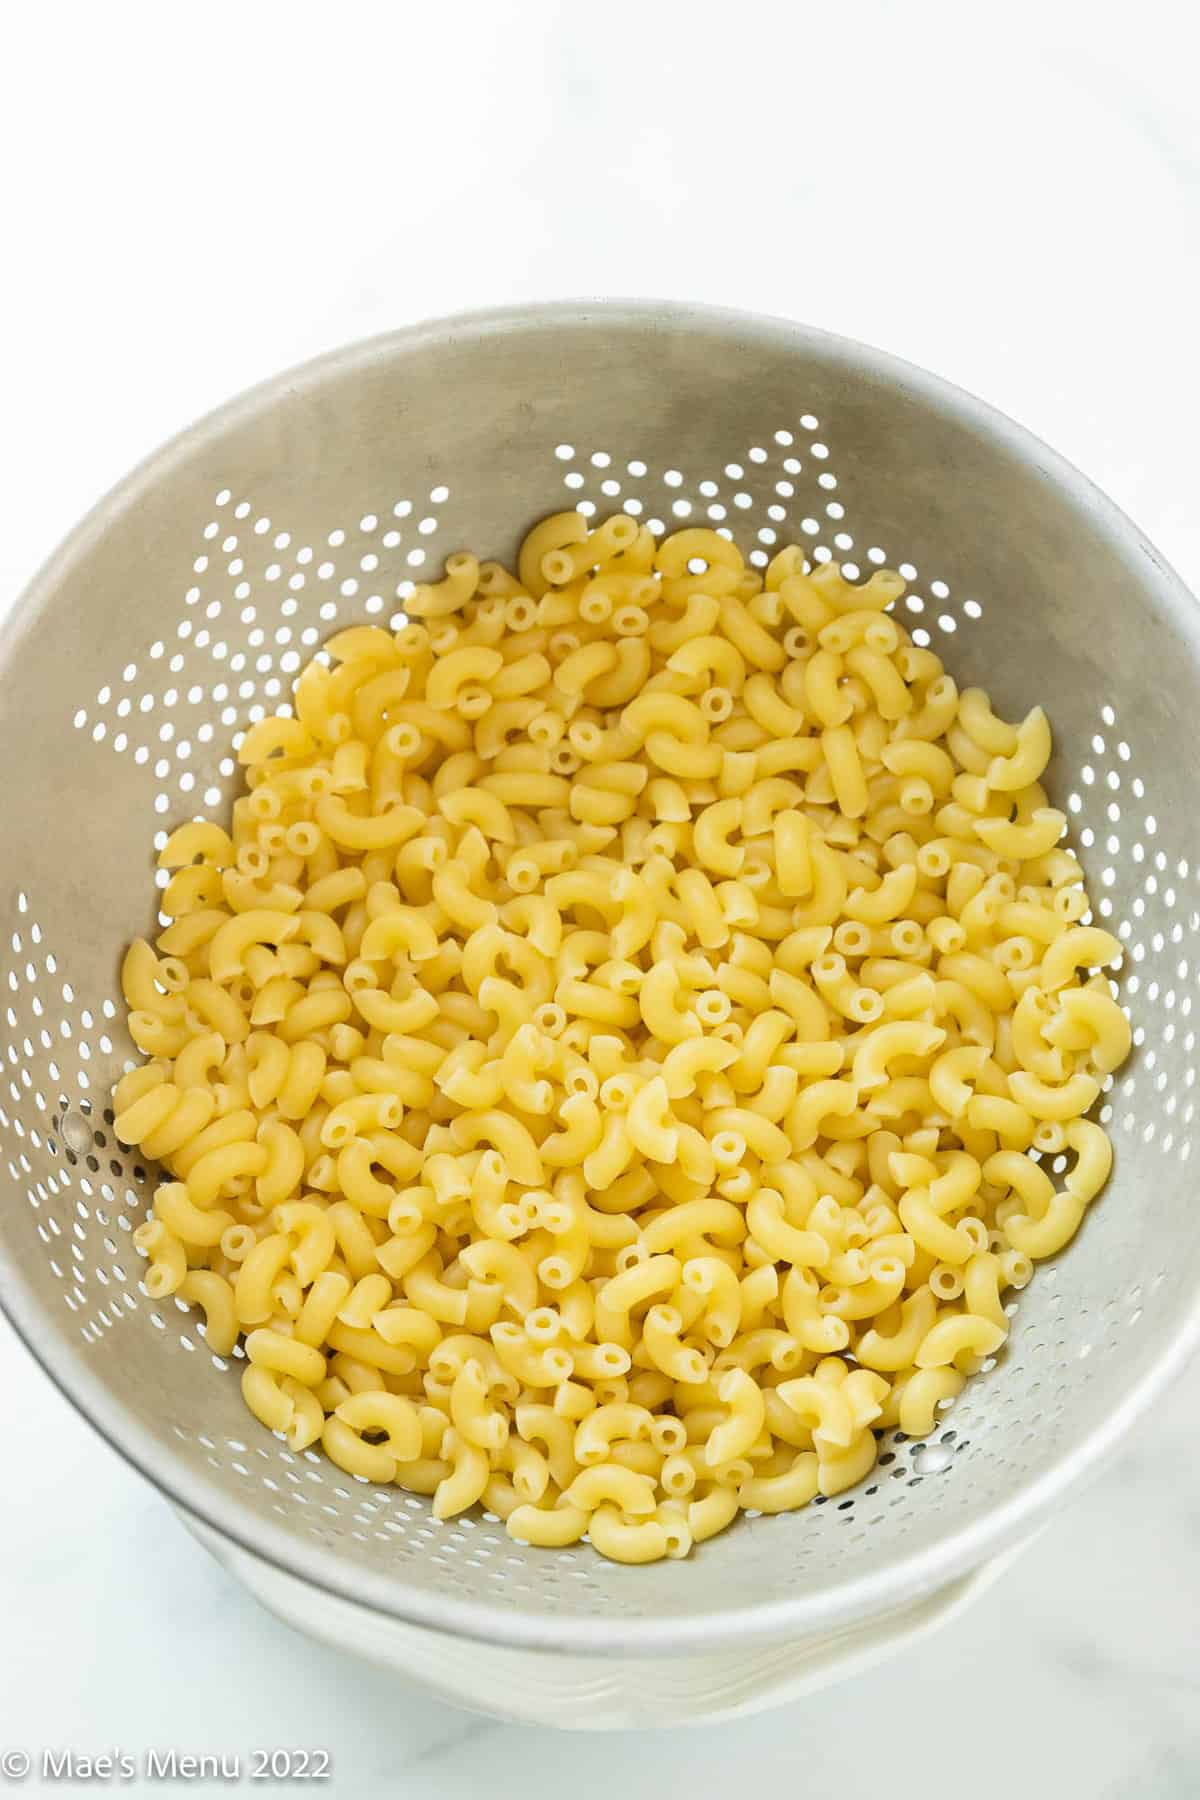 draining elbow macaroni in a colander.